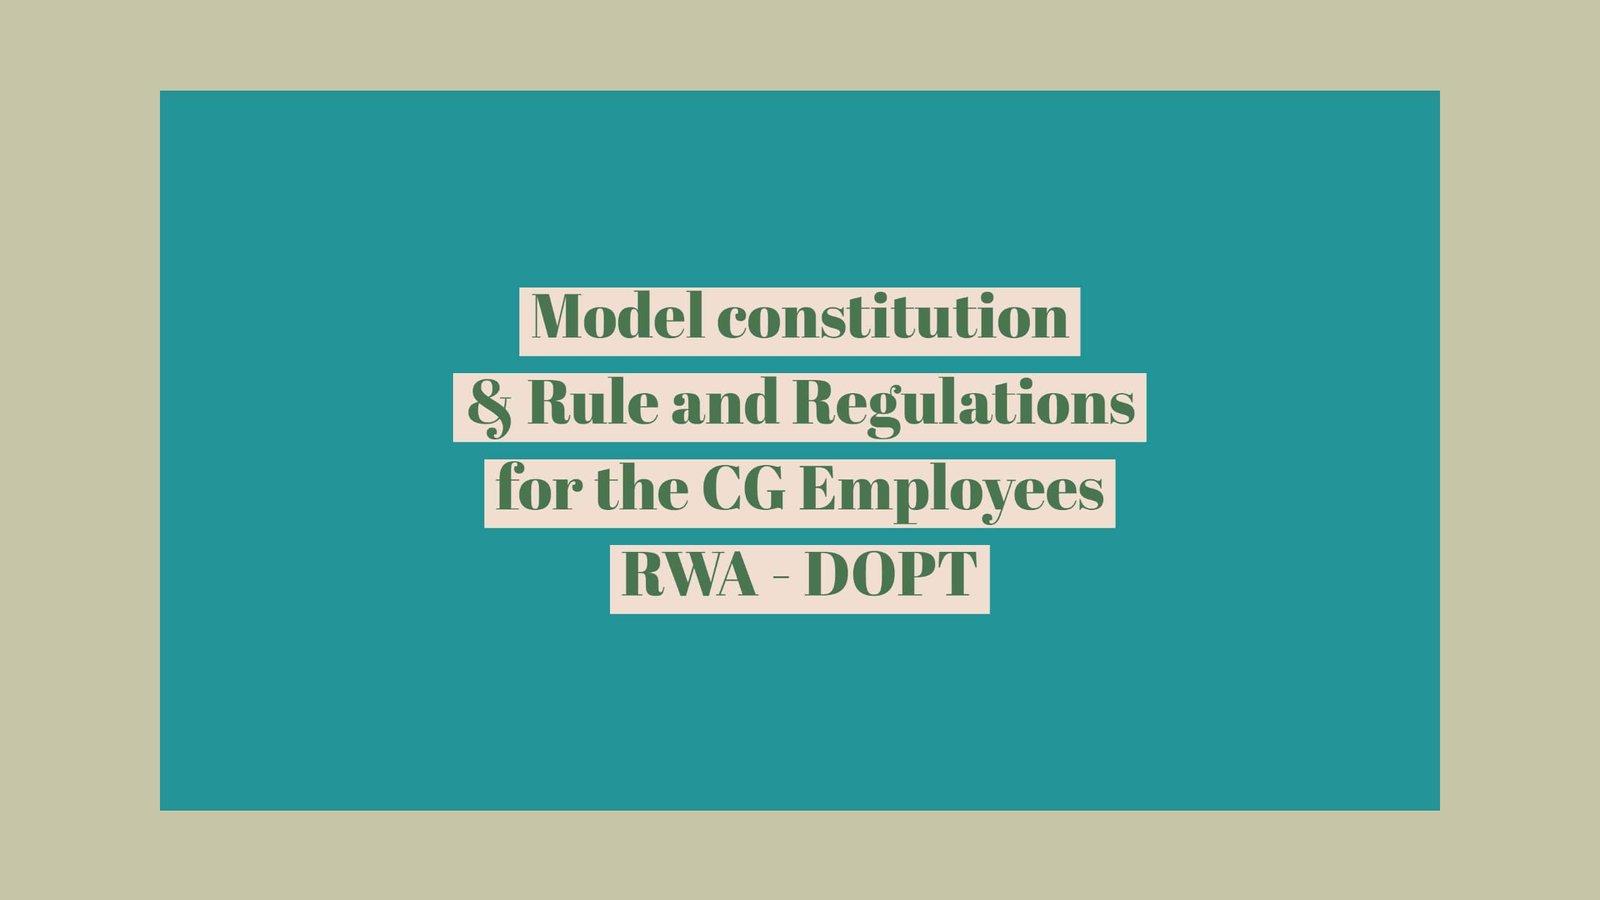 Model constitution & Rule and Regulations for the CG Employees RWA - DOPT